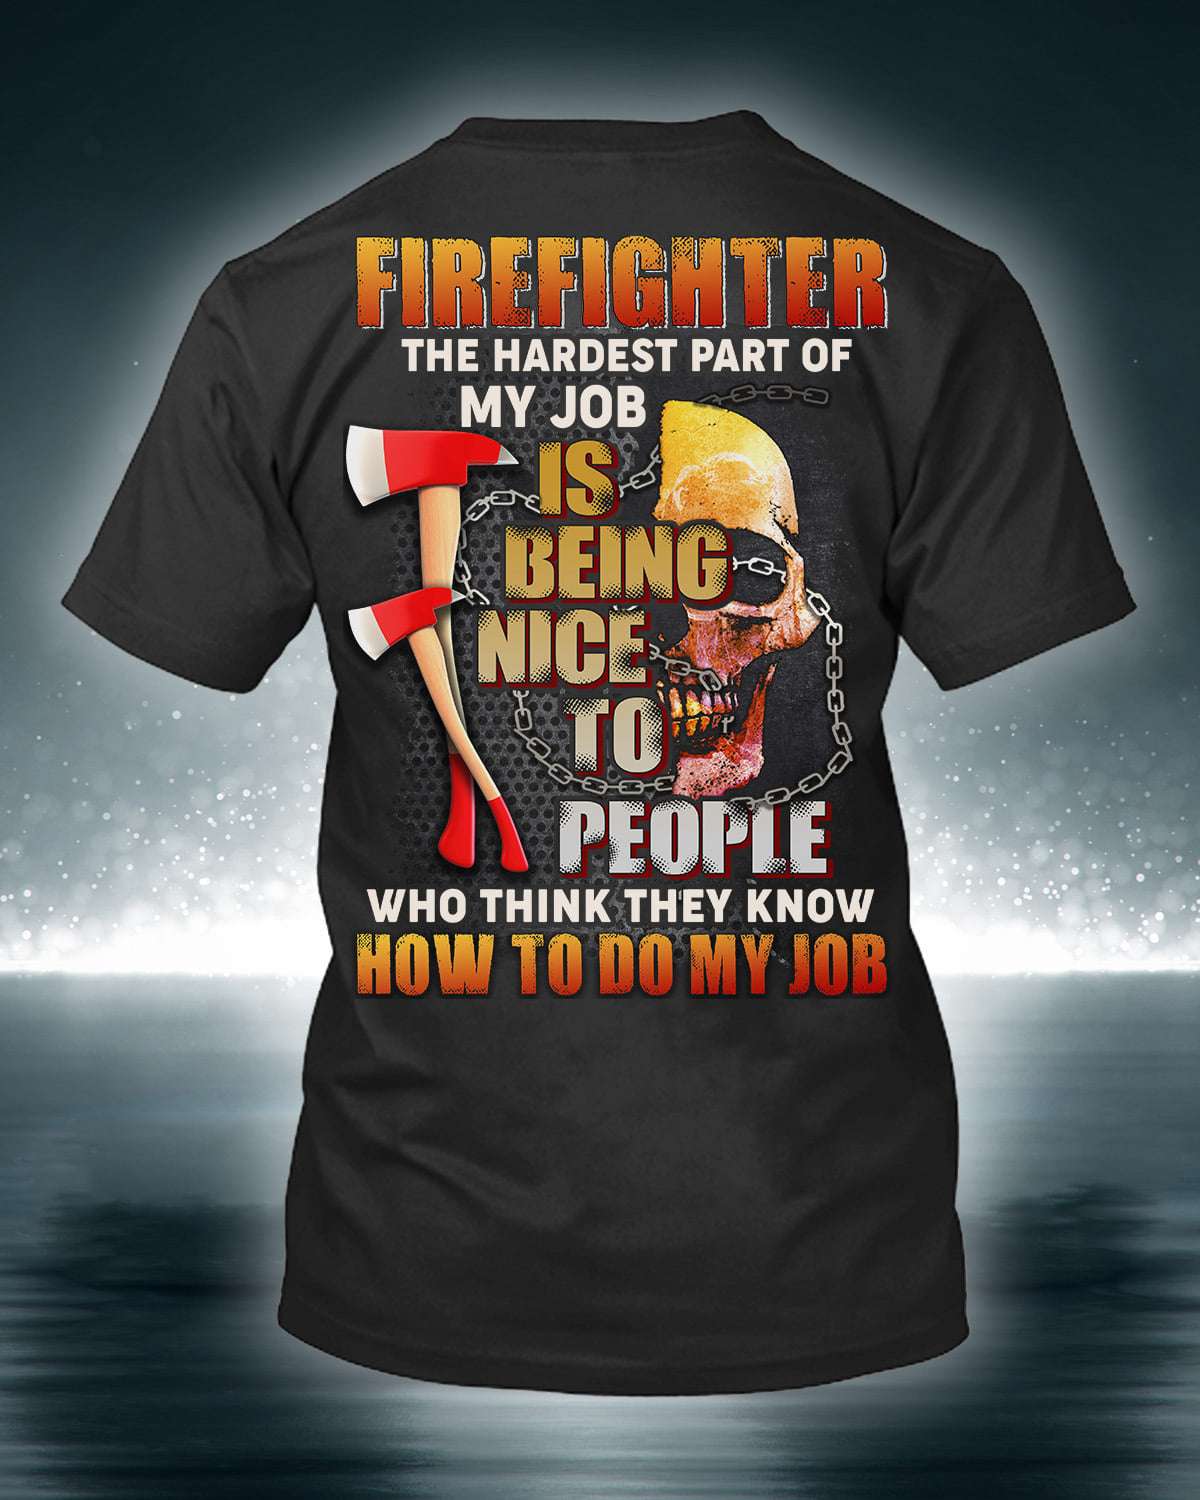 Firefighter Skull, September 11 - Firefighter the hardest part of my job is being nice to people who think they know